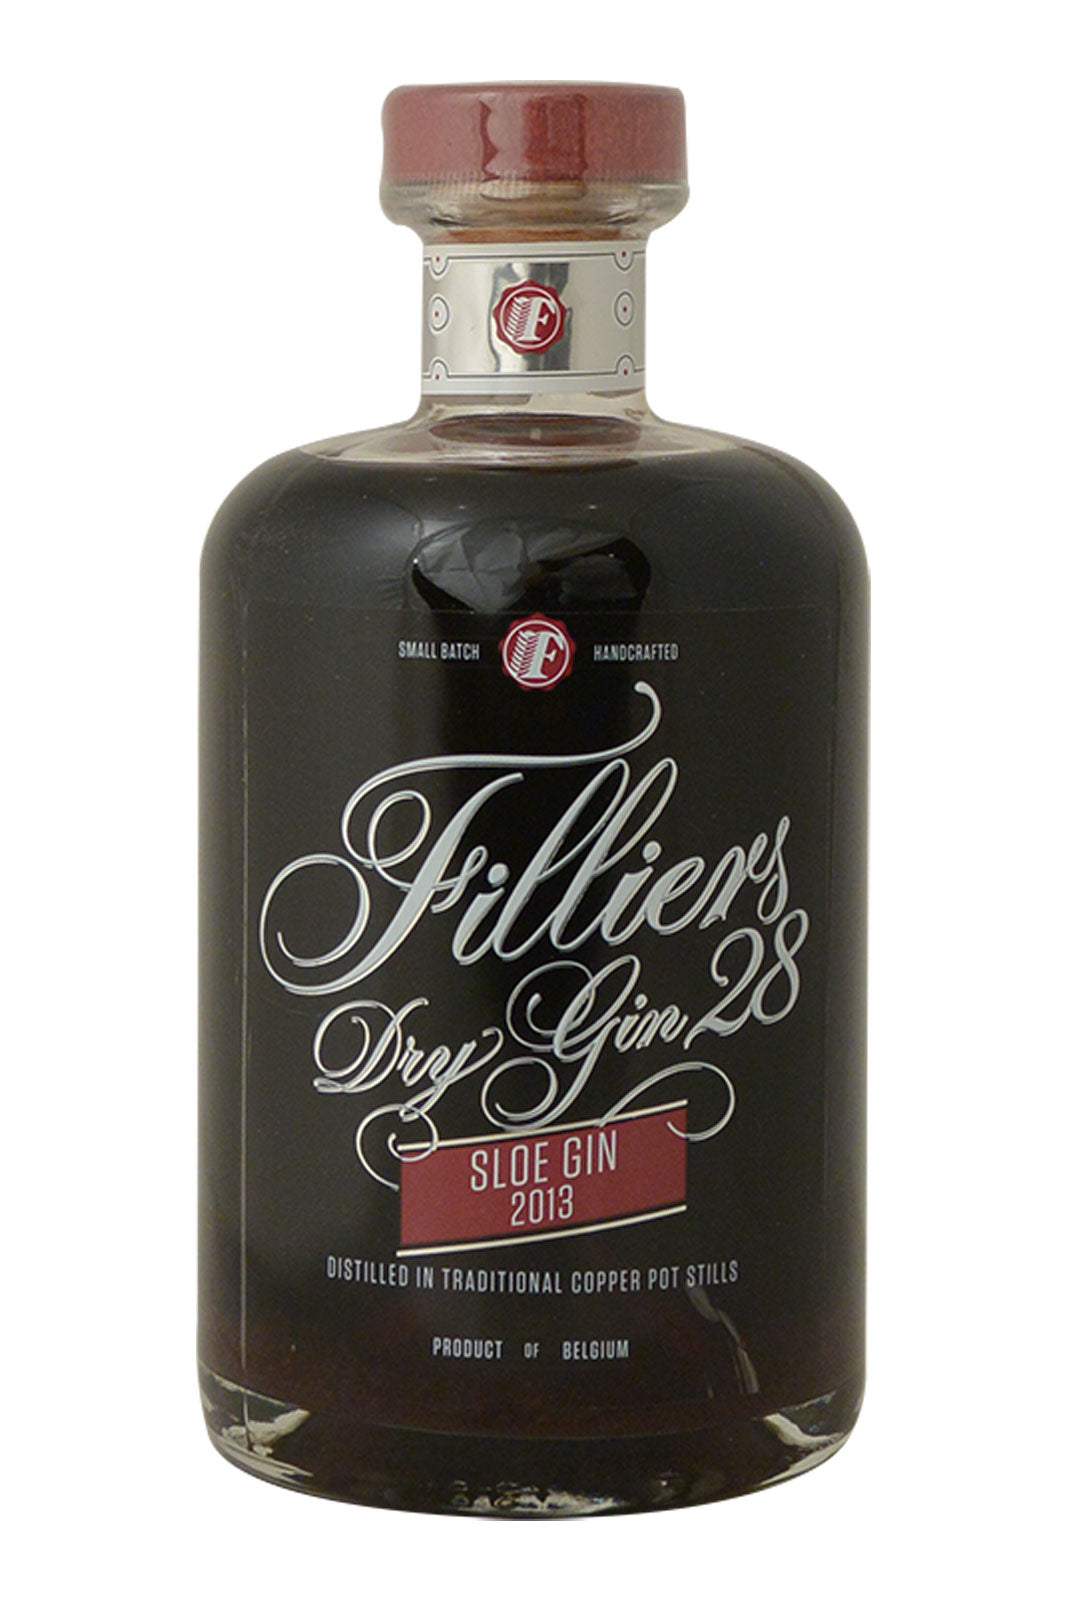 Filliers Dry Gin Sloe Gin